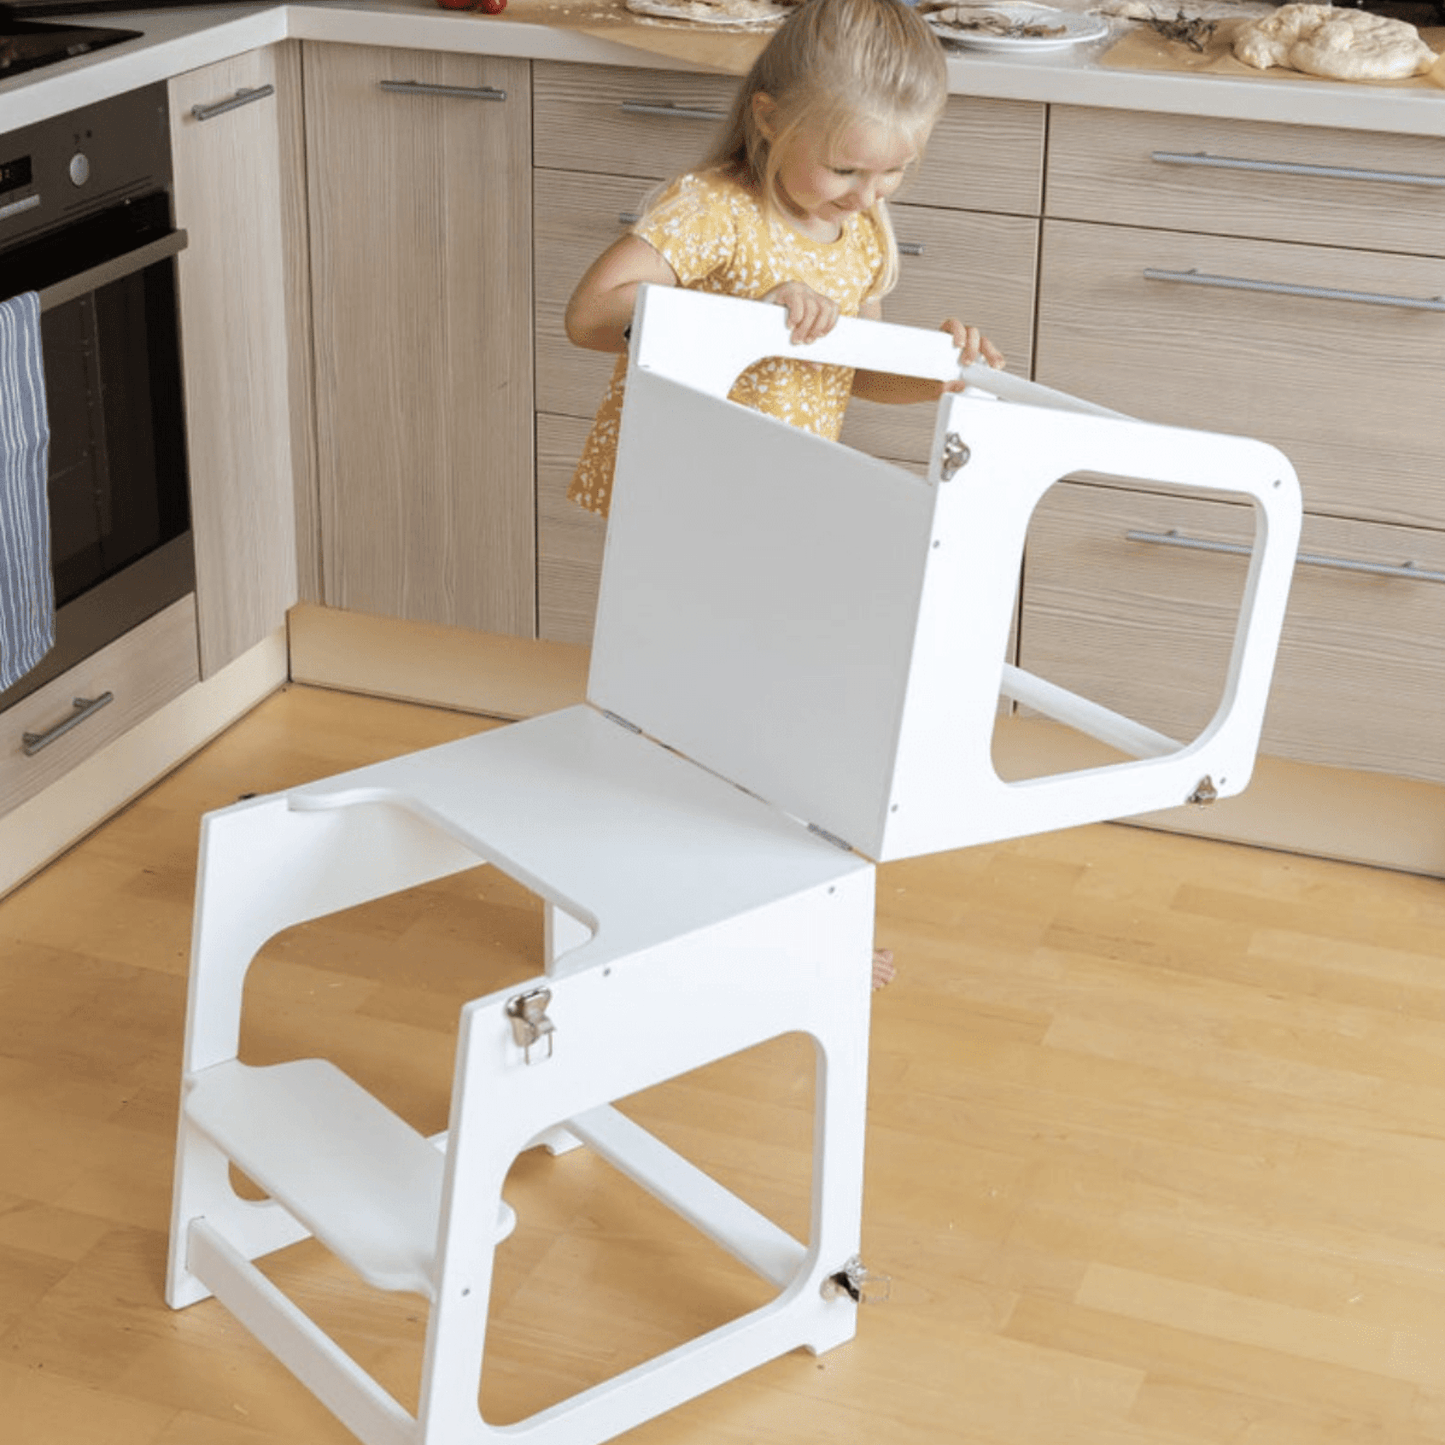 Convertible Wooden Learning Tower - Transforms from tower to table/chair